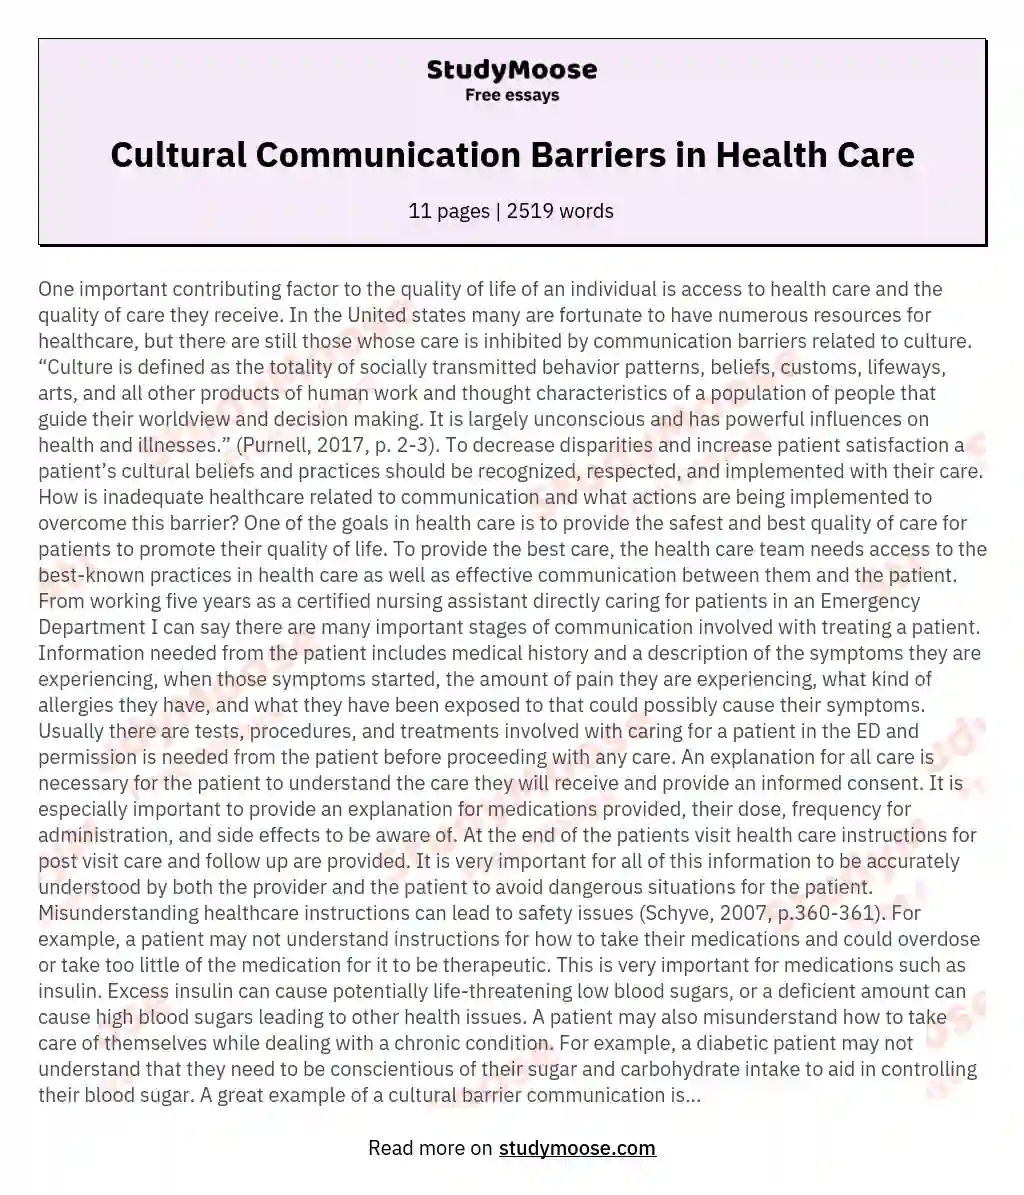 Cultural Communication Barriers in Health Care essay